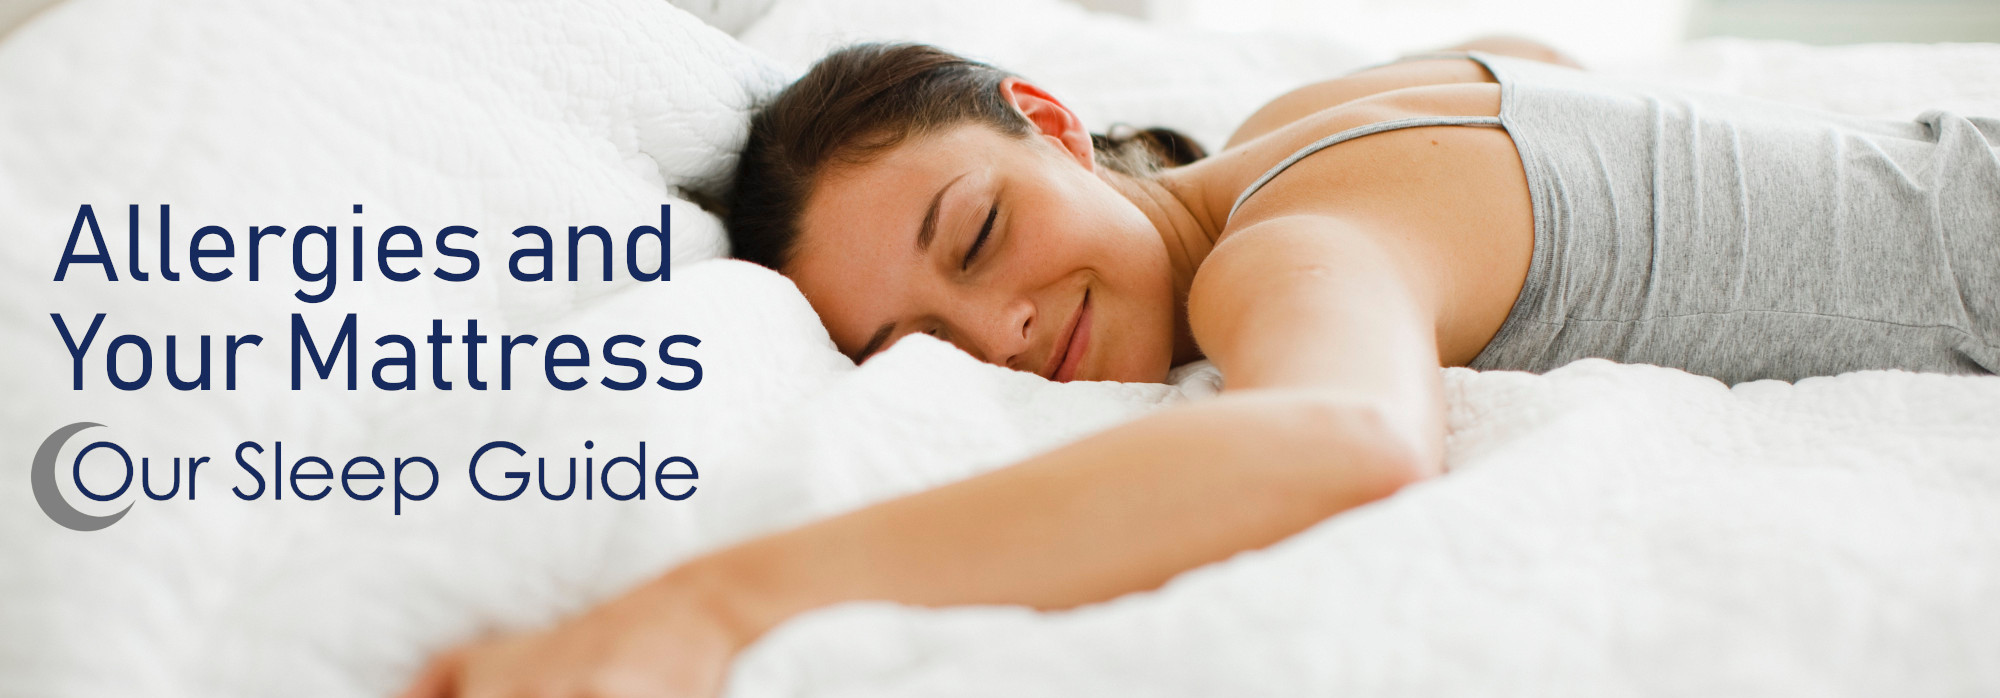 Allergies and your mattress our sleep guide